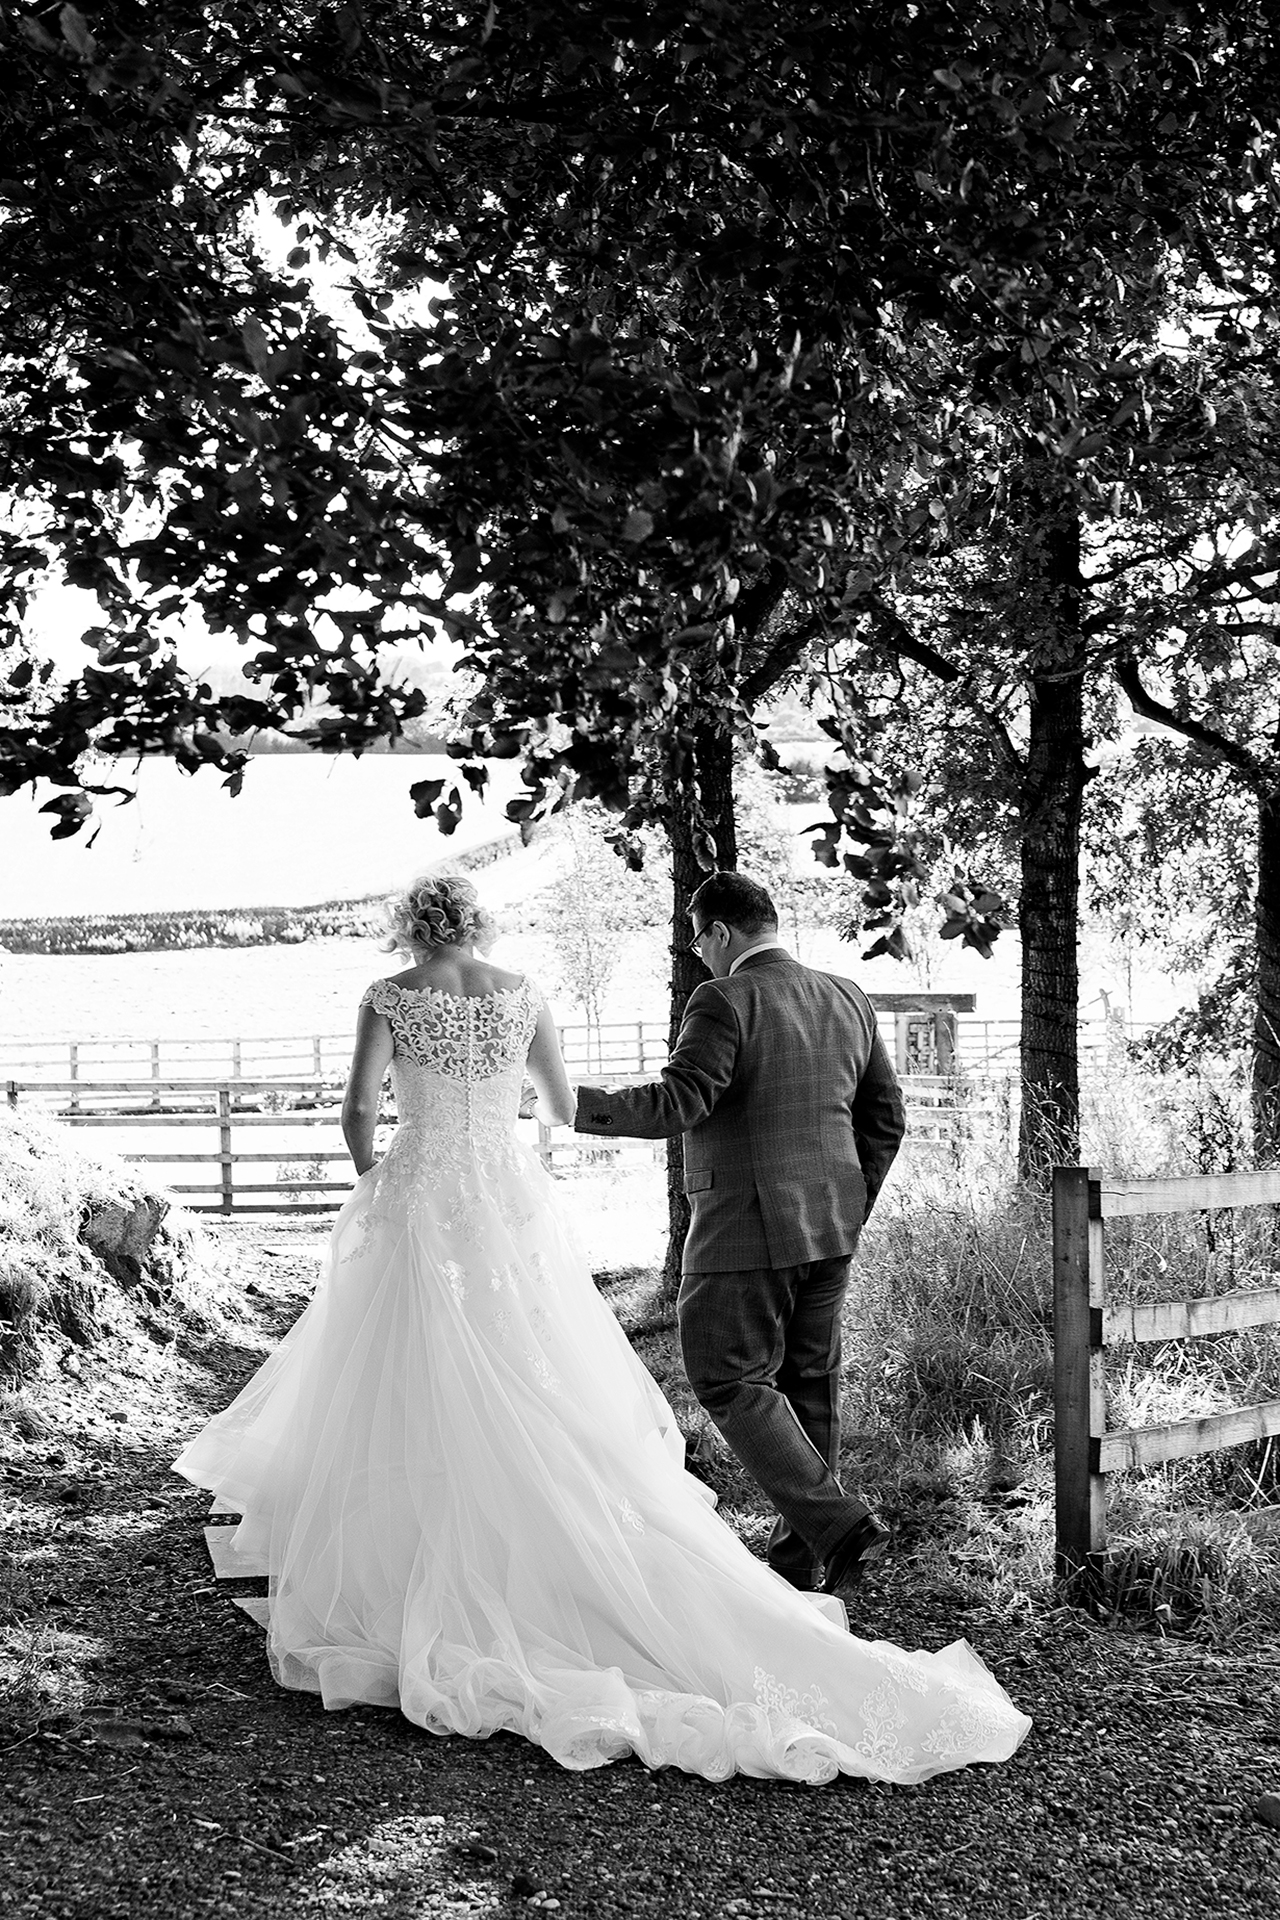 the bride and groom in the grounds of bash hall barn wedding venue